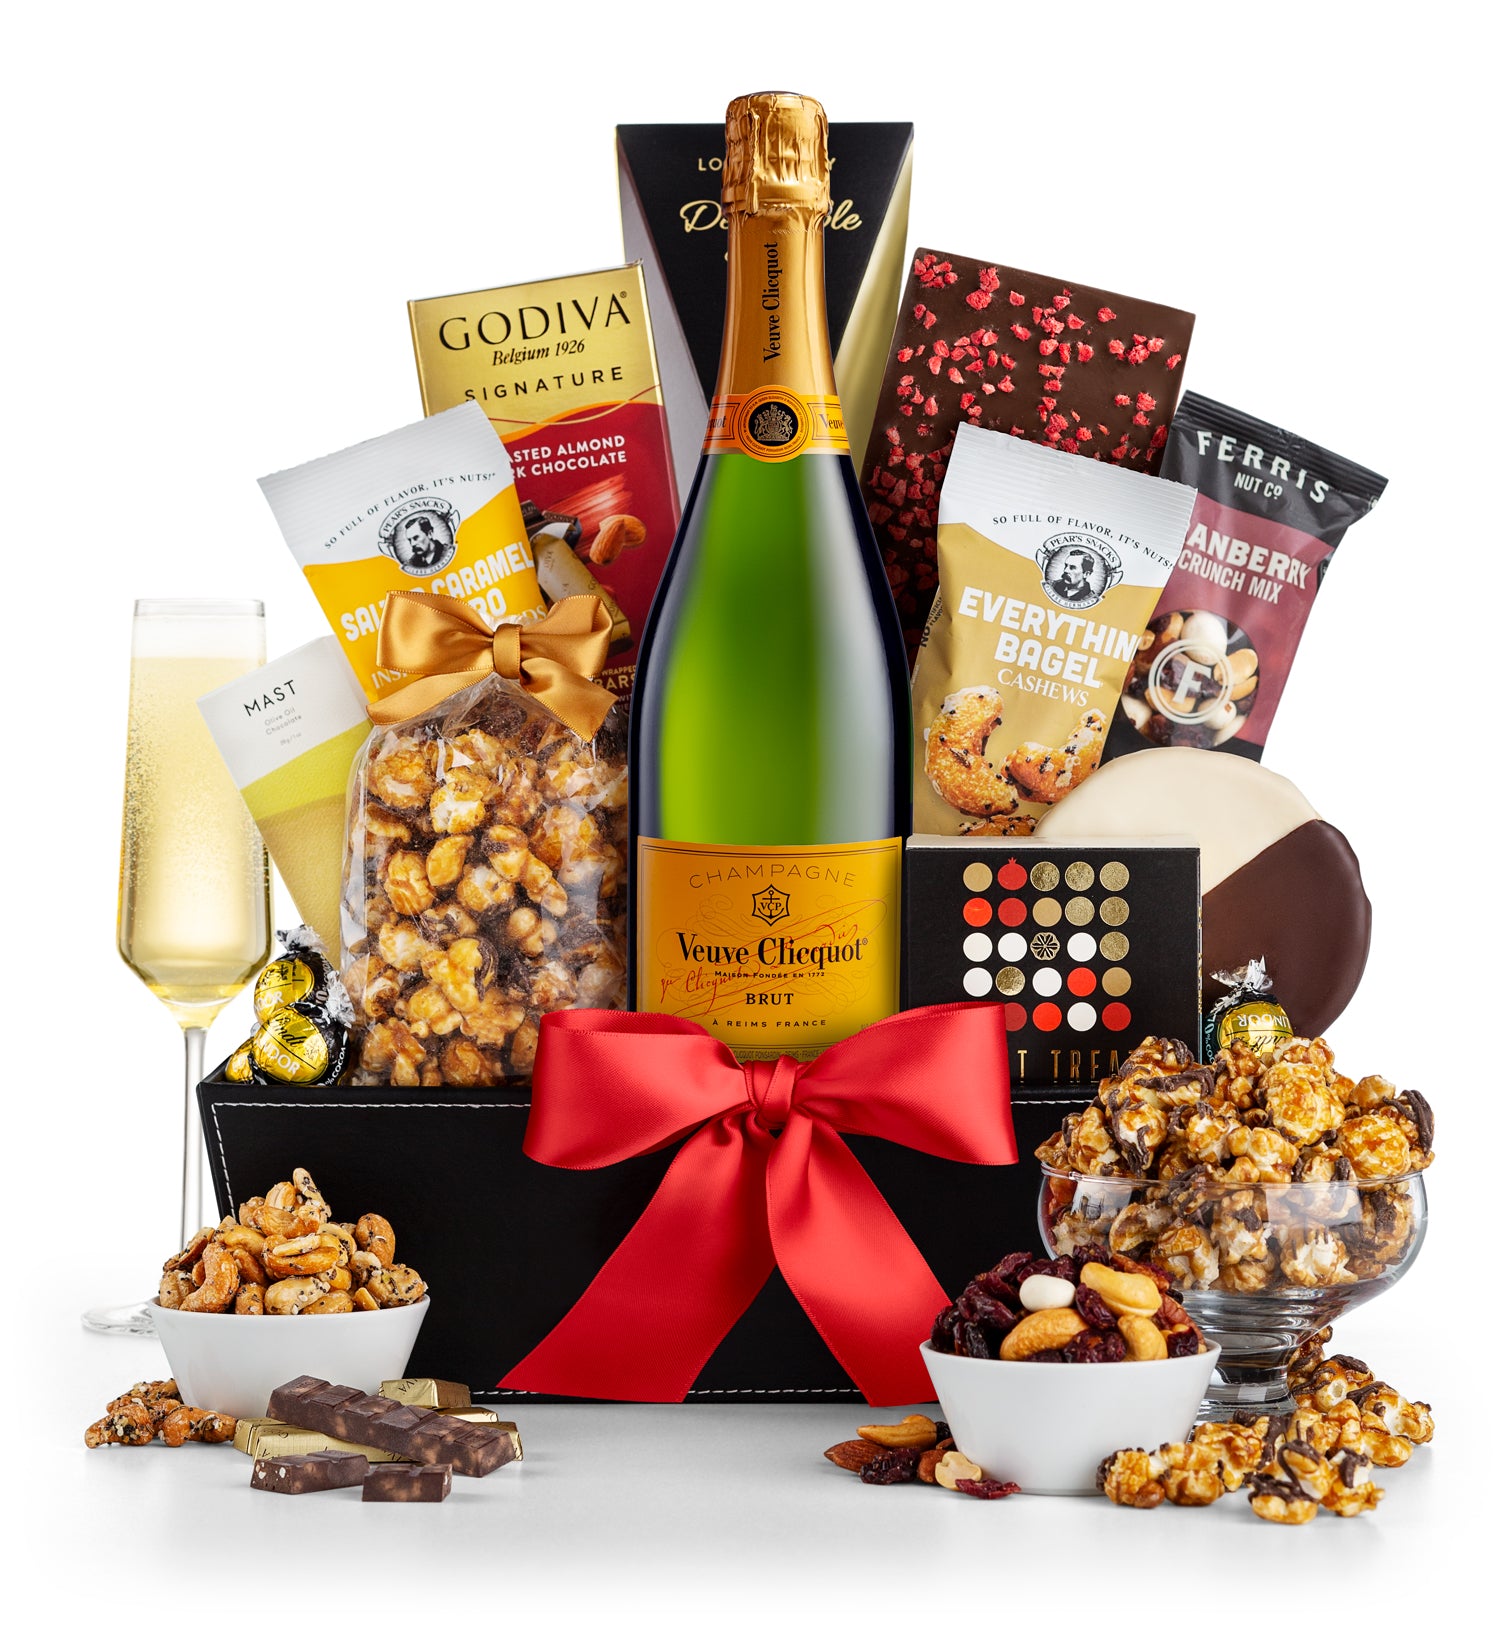 5th Avenue gift basket and Veuve Clicquot Champagne